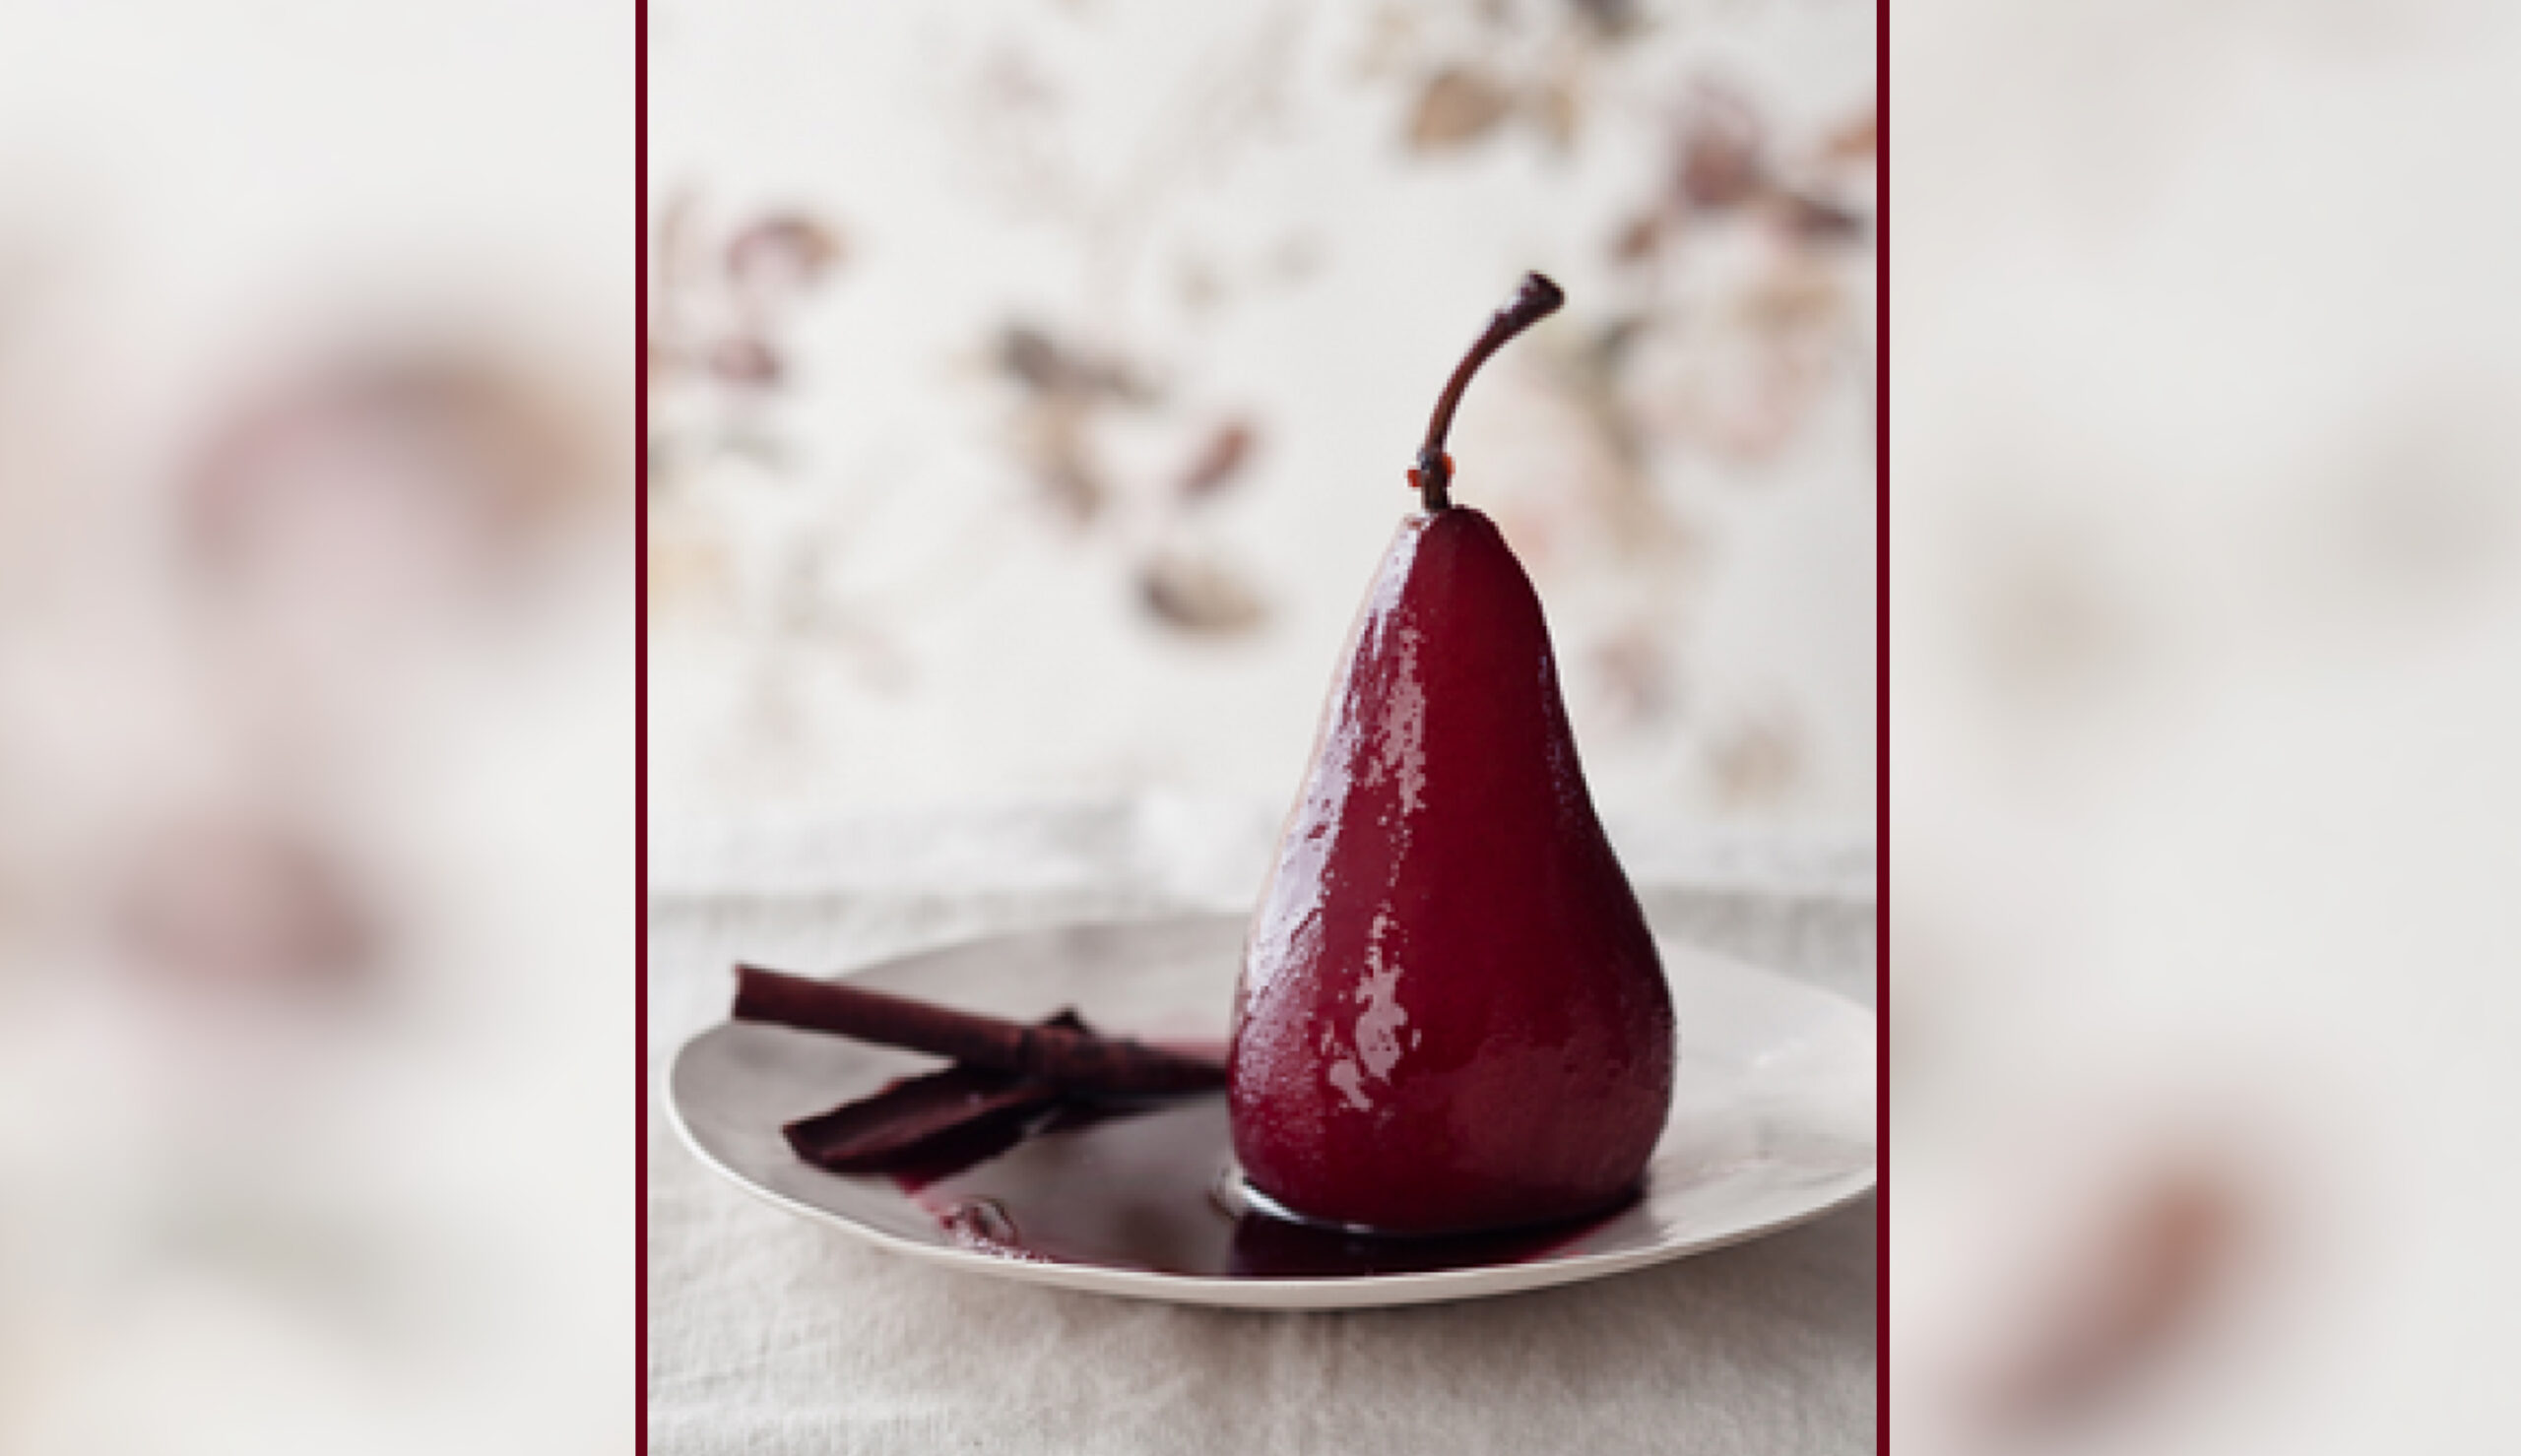 poached pears in red wine